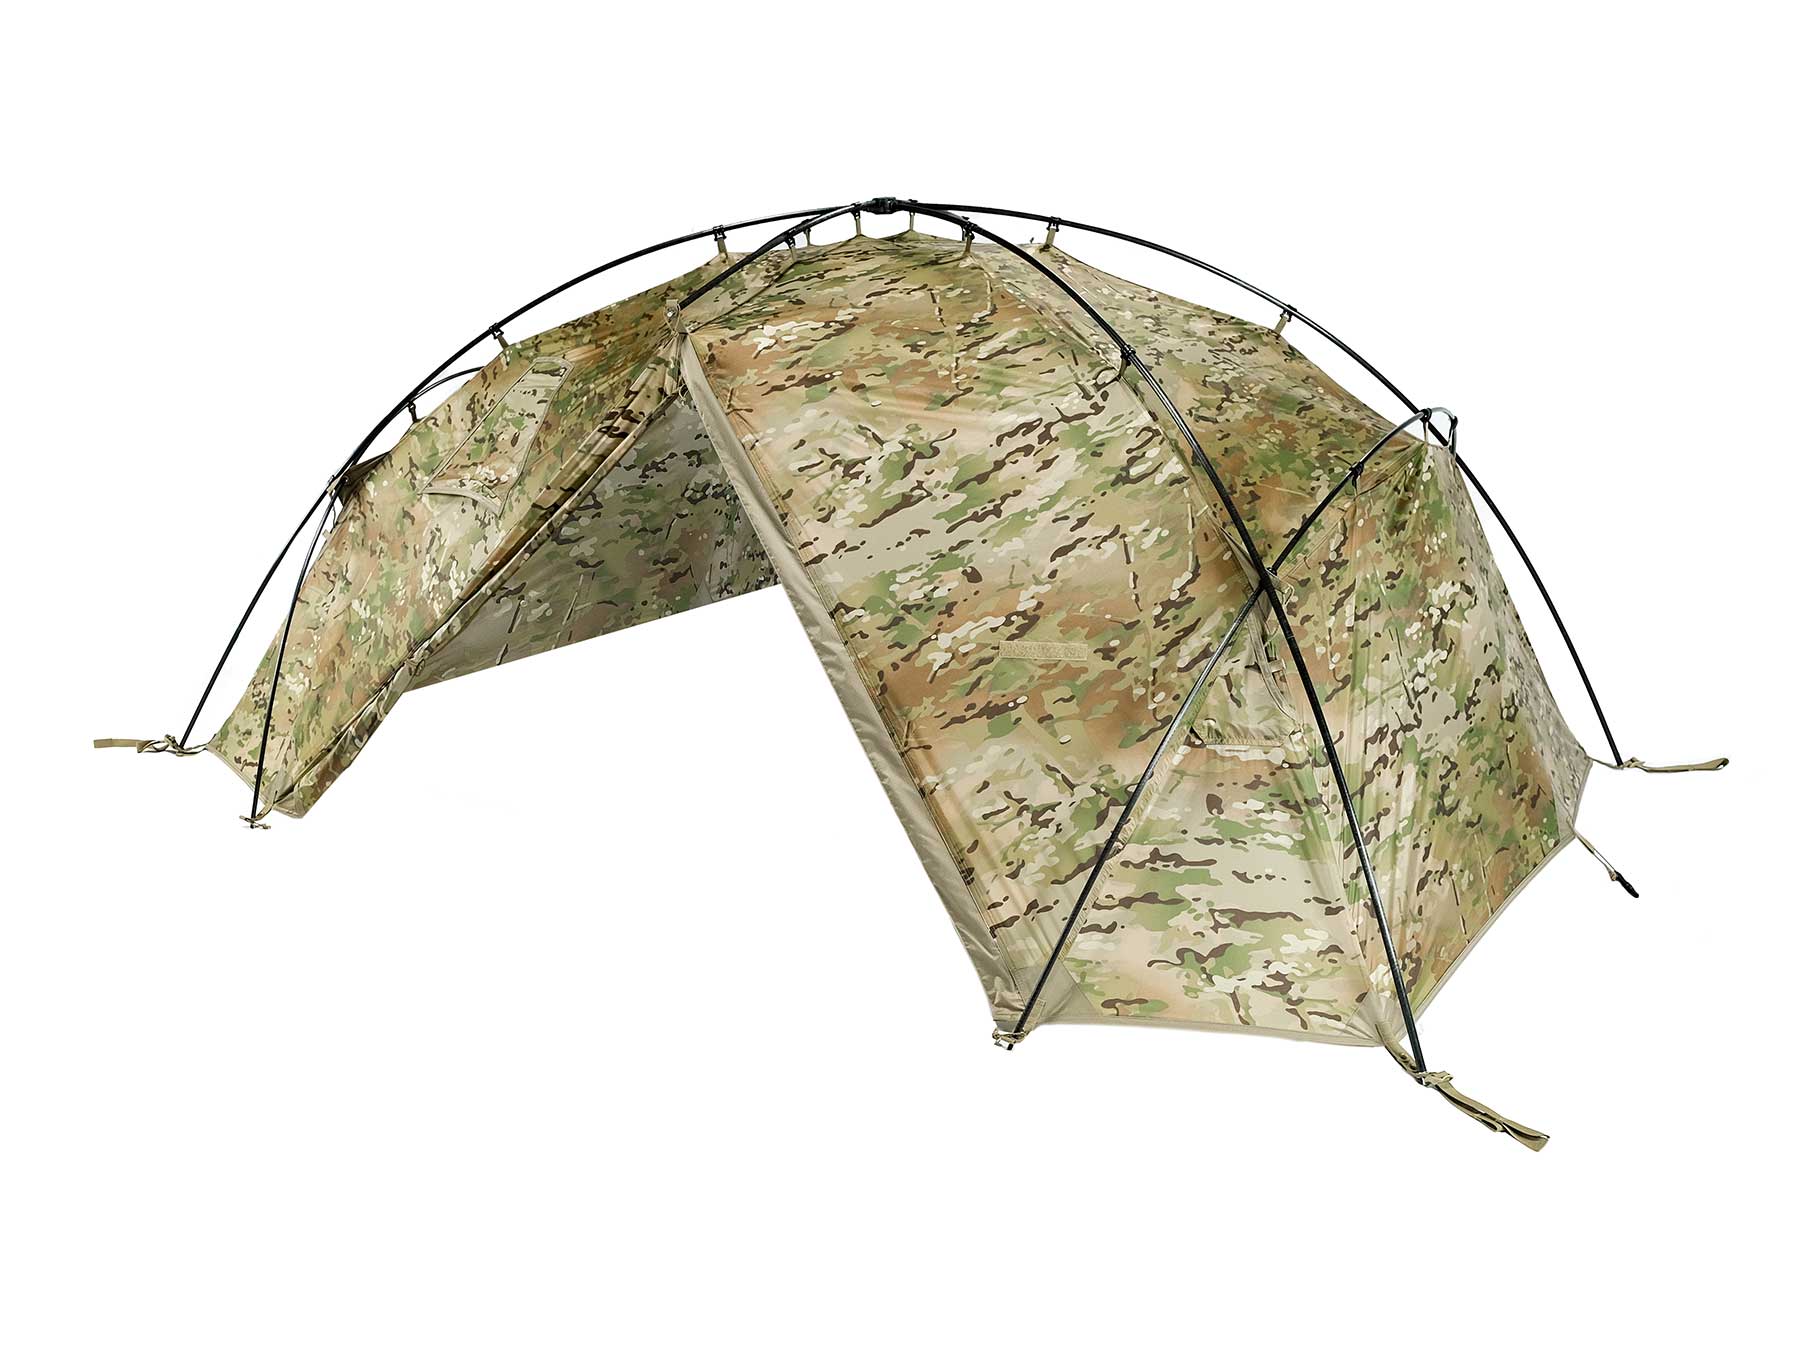 CataMount 2 Cold Weather Tent